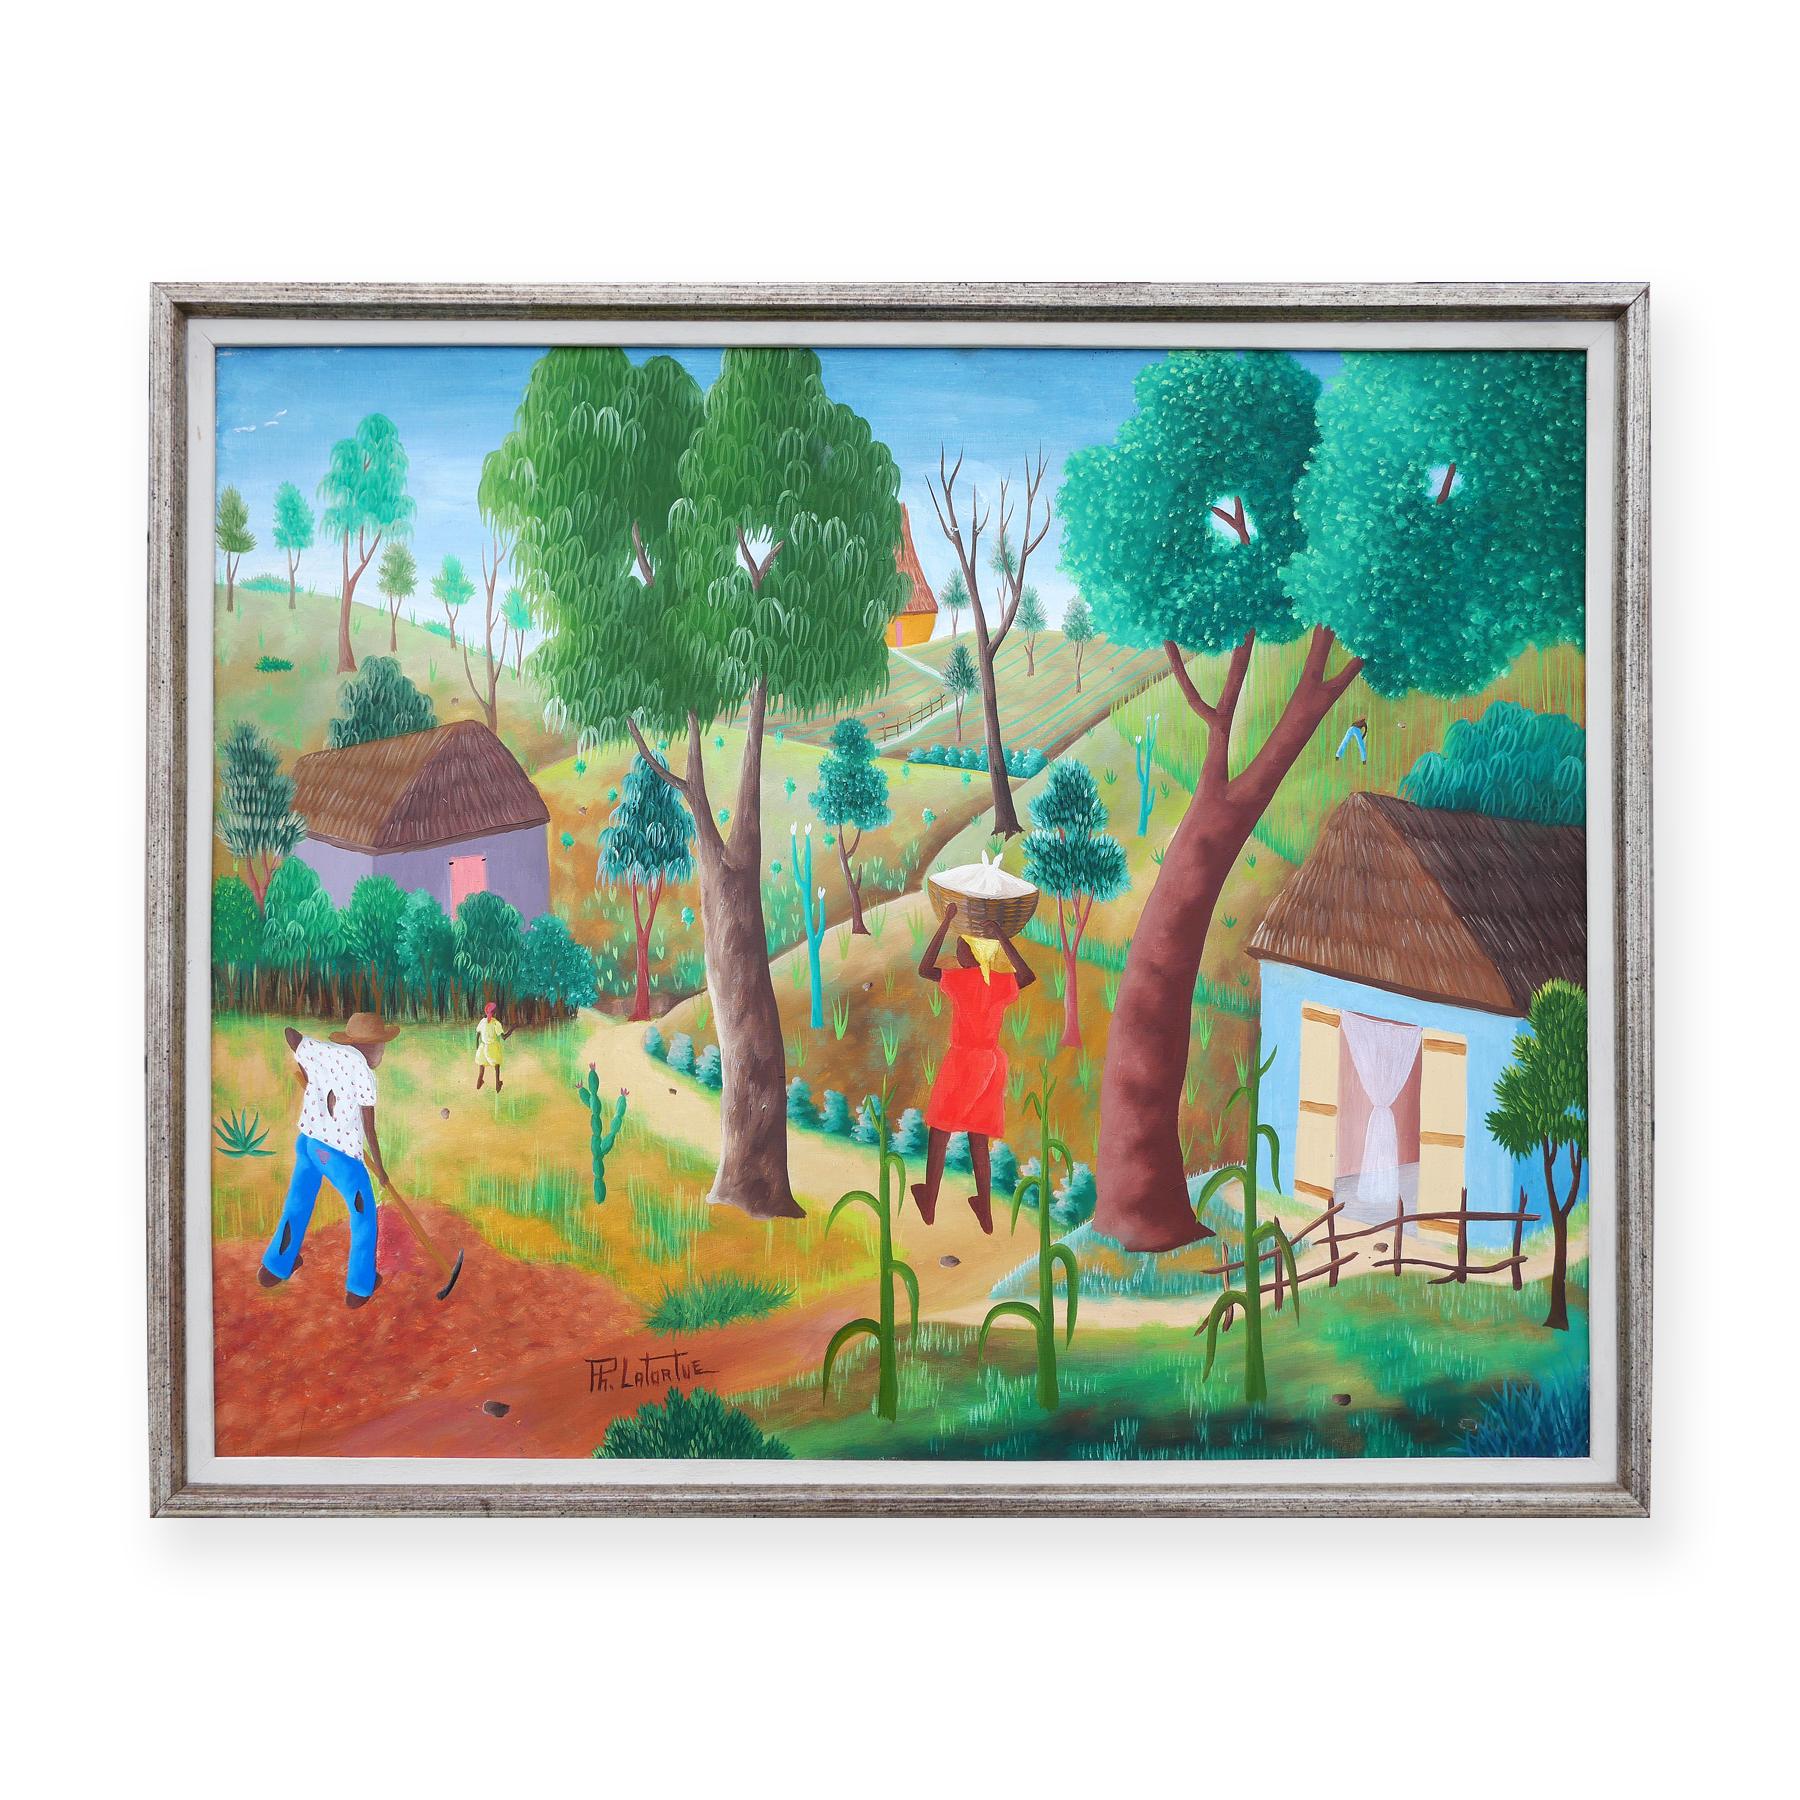 Warm-Toned Modern Abstract Haitian Farm Plantation Landscape with Figures - Painting by Philton Latortue